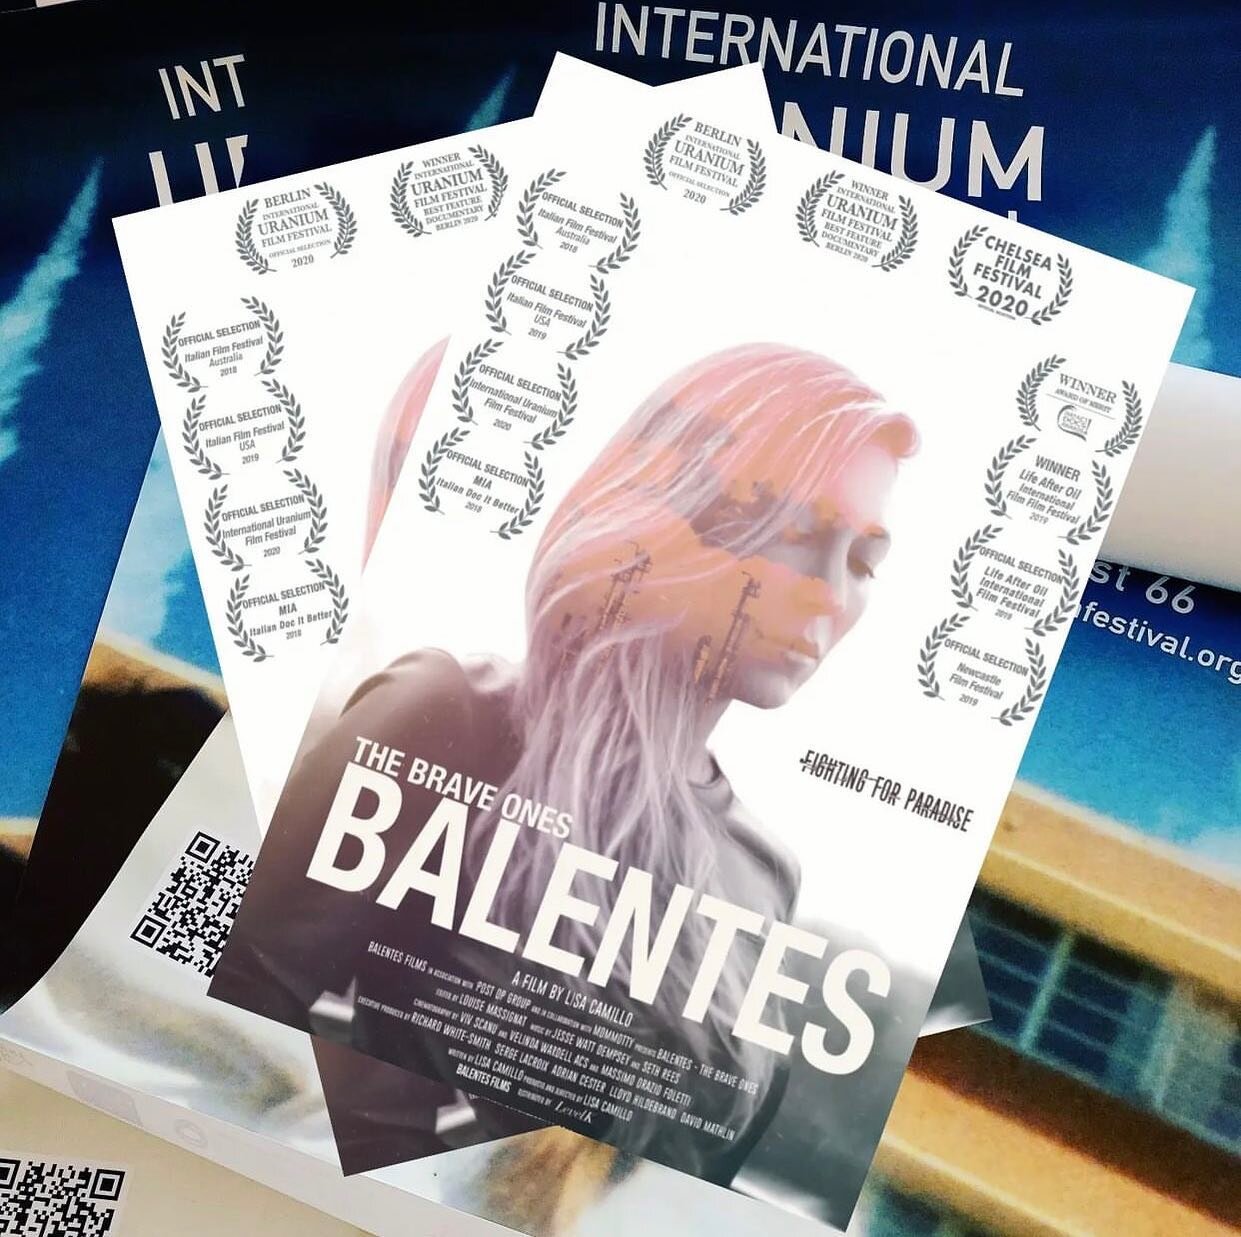 I&rsquo;m so excited to be back in Berlin at the @uraniumfilmfestivalberlin for 2 screenings of my feature film @balentes_film 📽🍿 it&rsquo;s already been 2 years we were there when they awarded it &lsquo;best feature documentary&rsquo; 🖤🎬 #docume